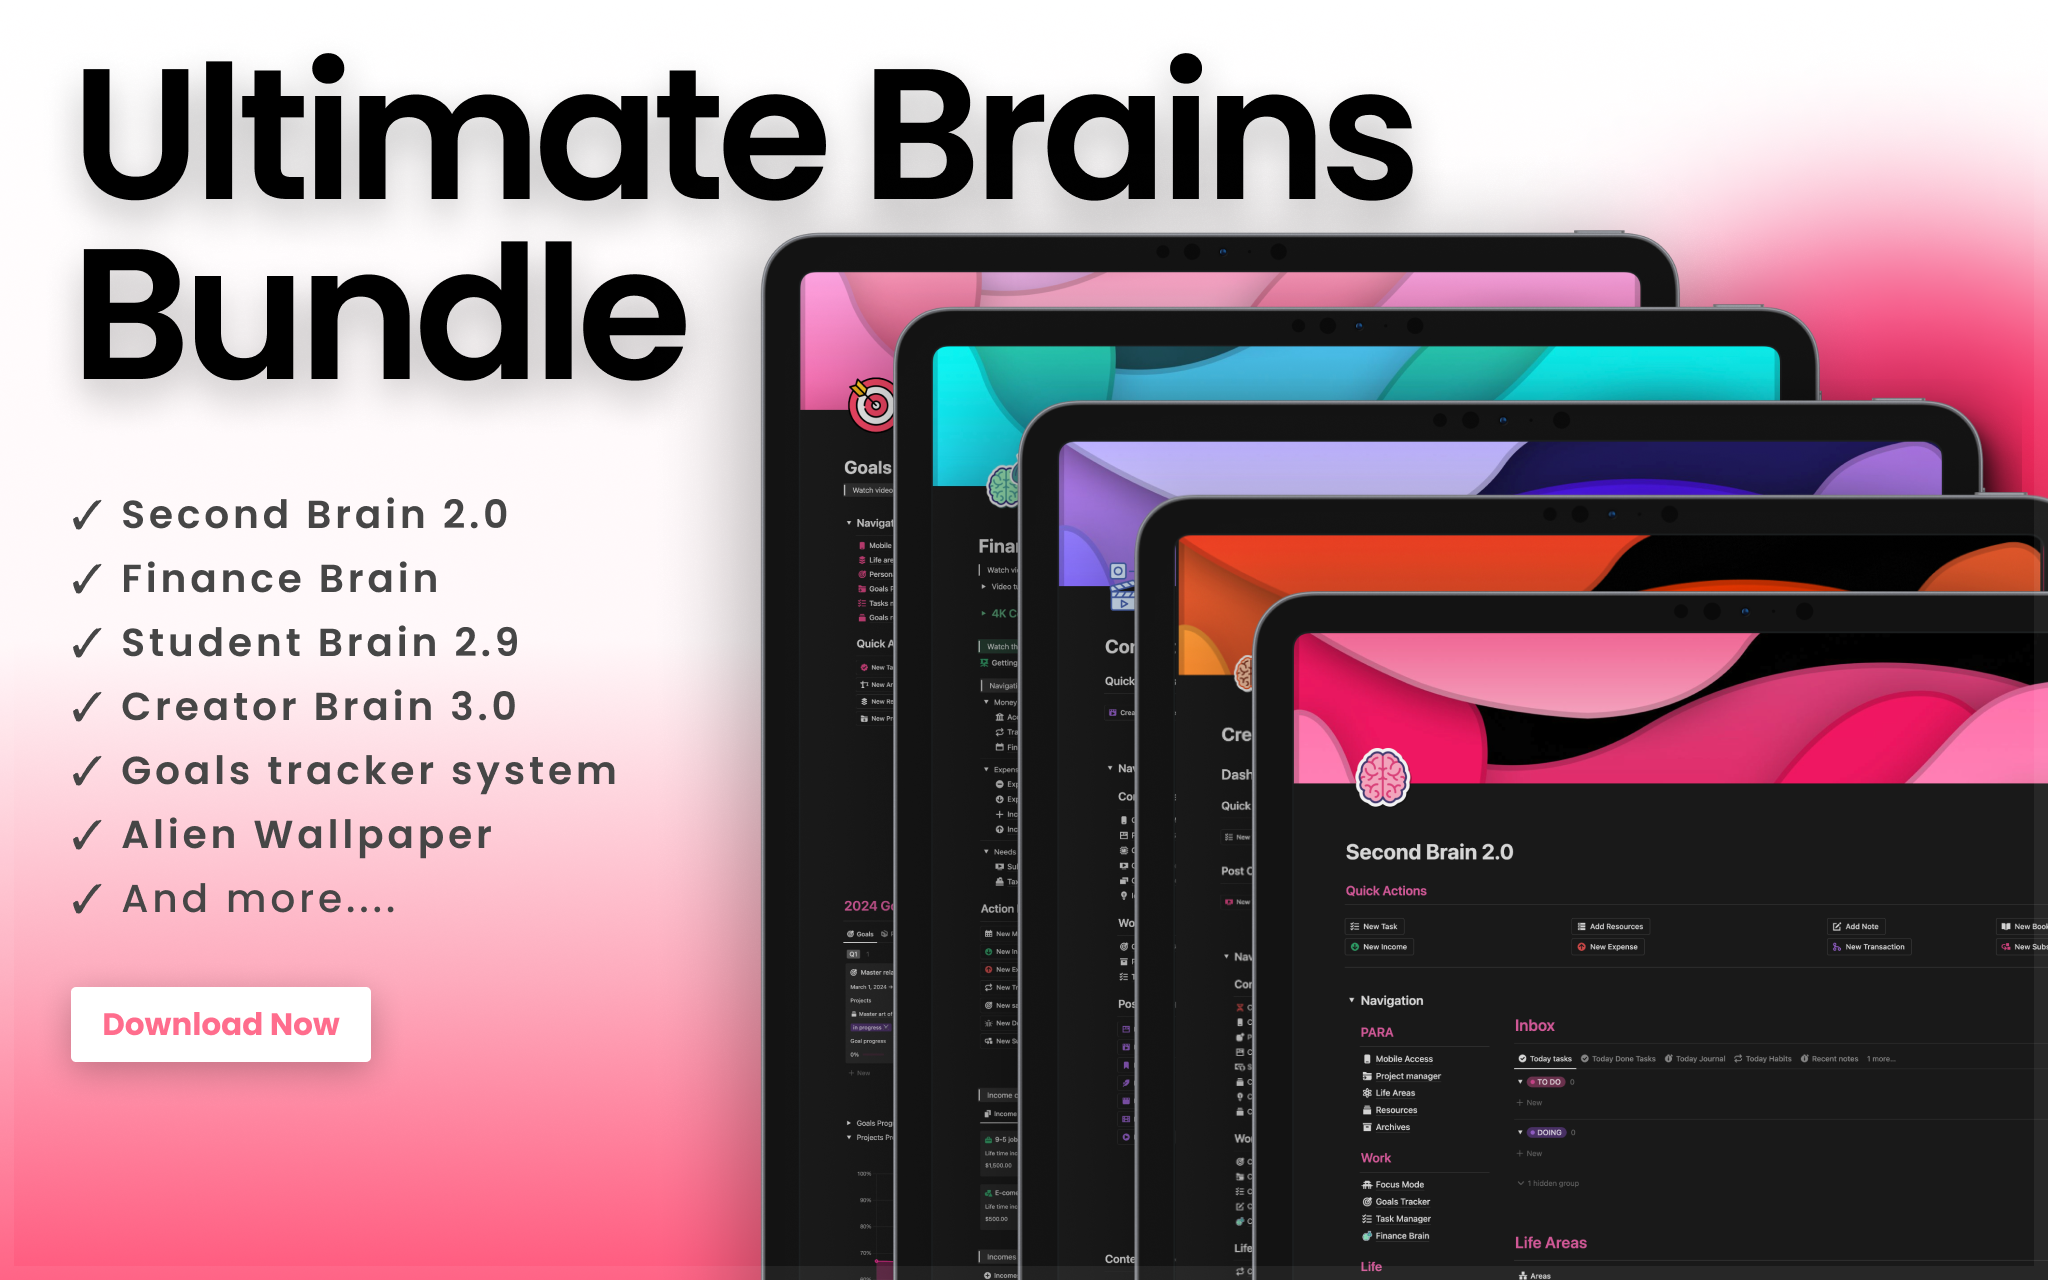 This Bundle include 7 Big templates:
- Second Brain 2.0
- Student Brain 2.9
- Creator Brain 3.0
- Finance Brain
- Summer Board
- Goals tracker system 2.0
- CreatorOS

And My Premium Notion covers and wallpapers